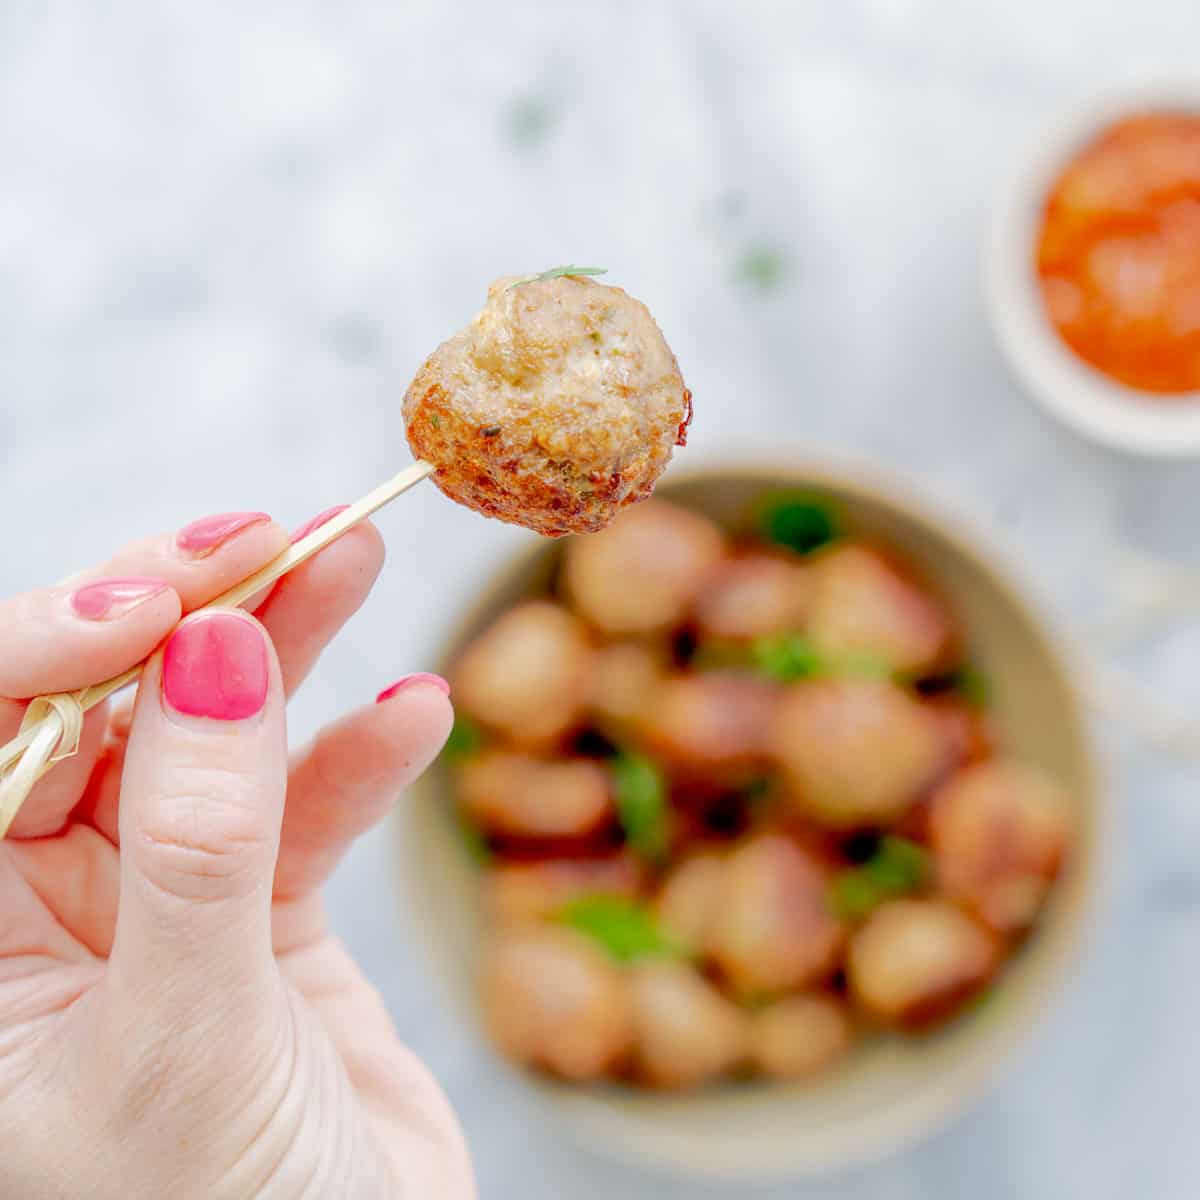 A bowl full of meatballs, with a hand holding up one meatball  above them with a tooth pick.